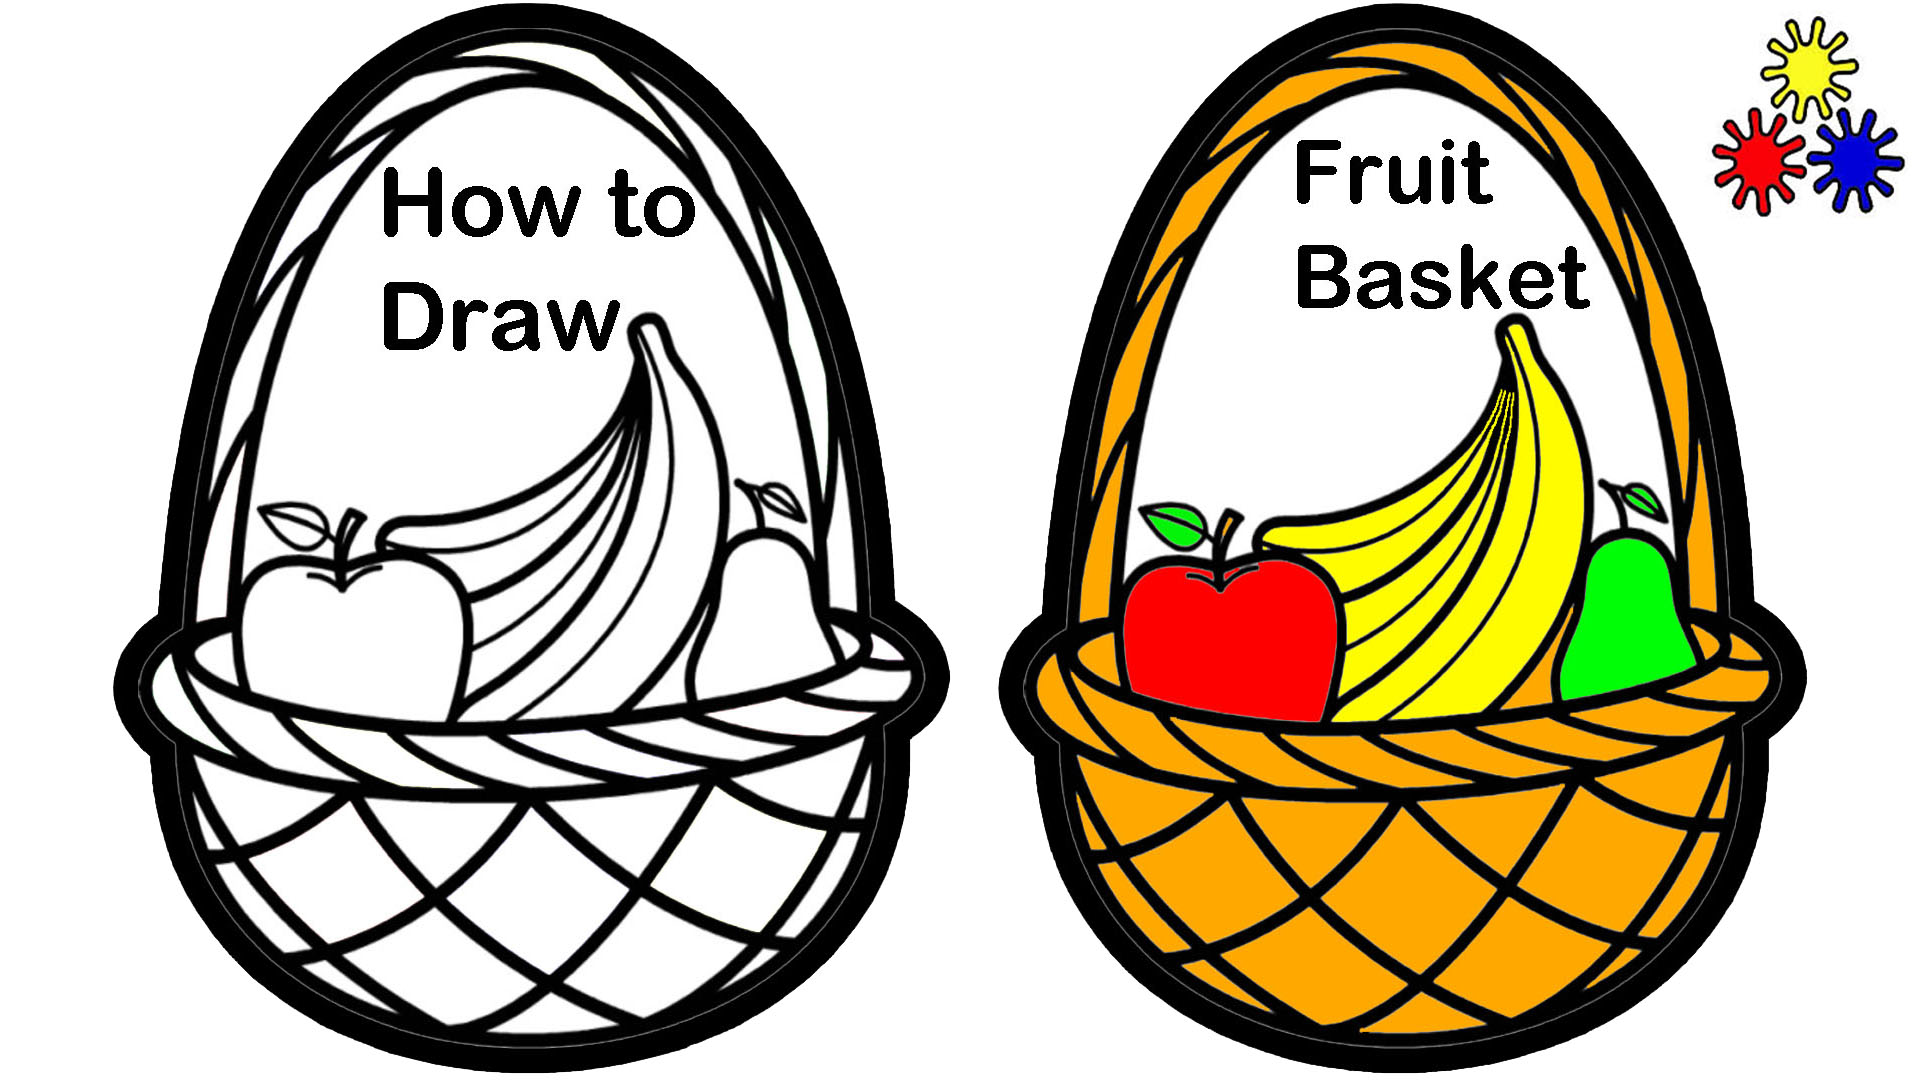 Jolly Toy on Twitter: "Fruit Basket Drawing Pictures Easy | How to Draw  Fruits | Jolly Toy Art! https://t.co/oW5UsQ5Crc via @YouTube #digitalart  #digitaldrawing #draw #drawings #drawingtutorial #drawing #drawingart #cute  #beautiful #howtodraw #HowTo #